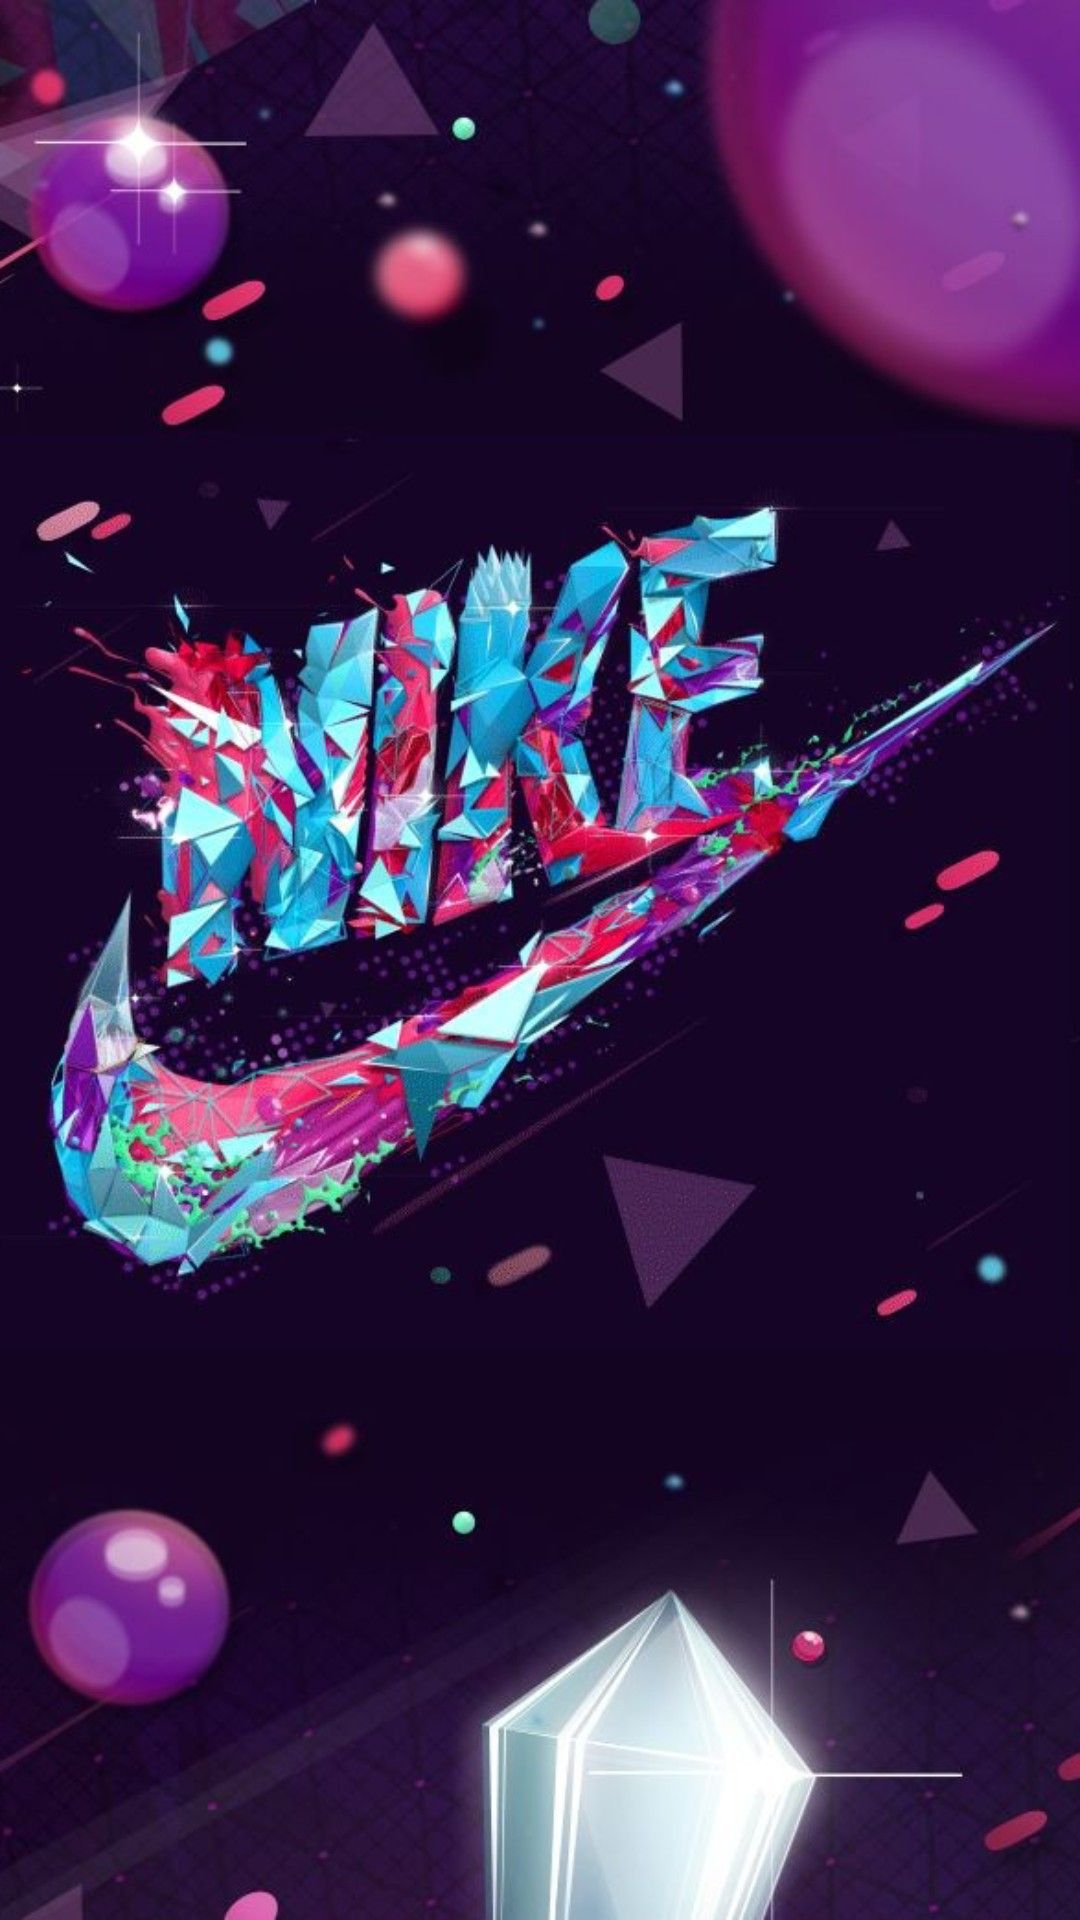 Nike Live Wallpapers